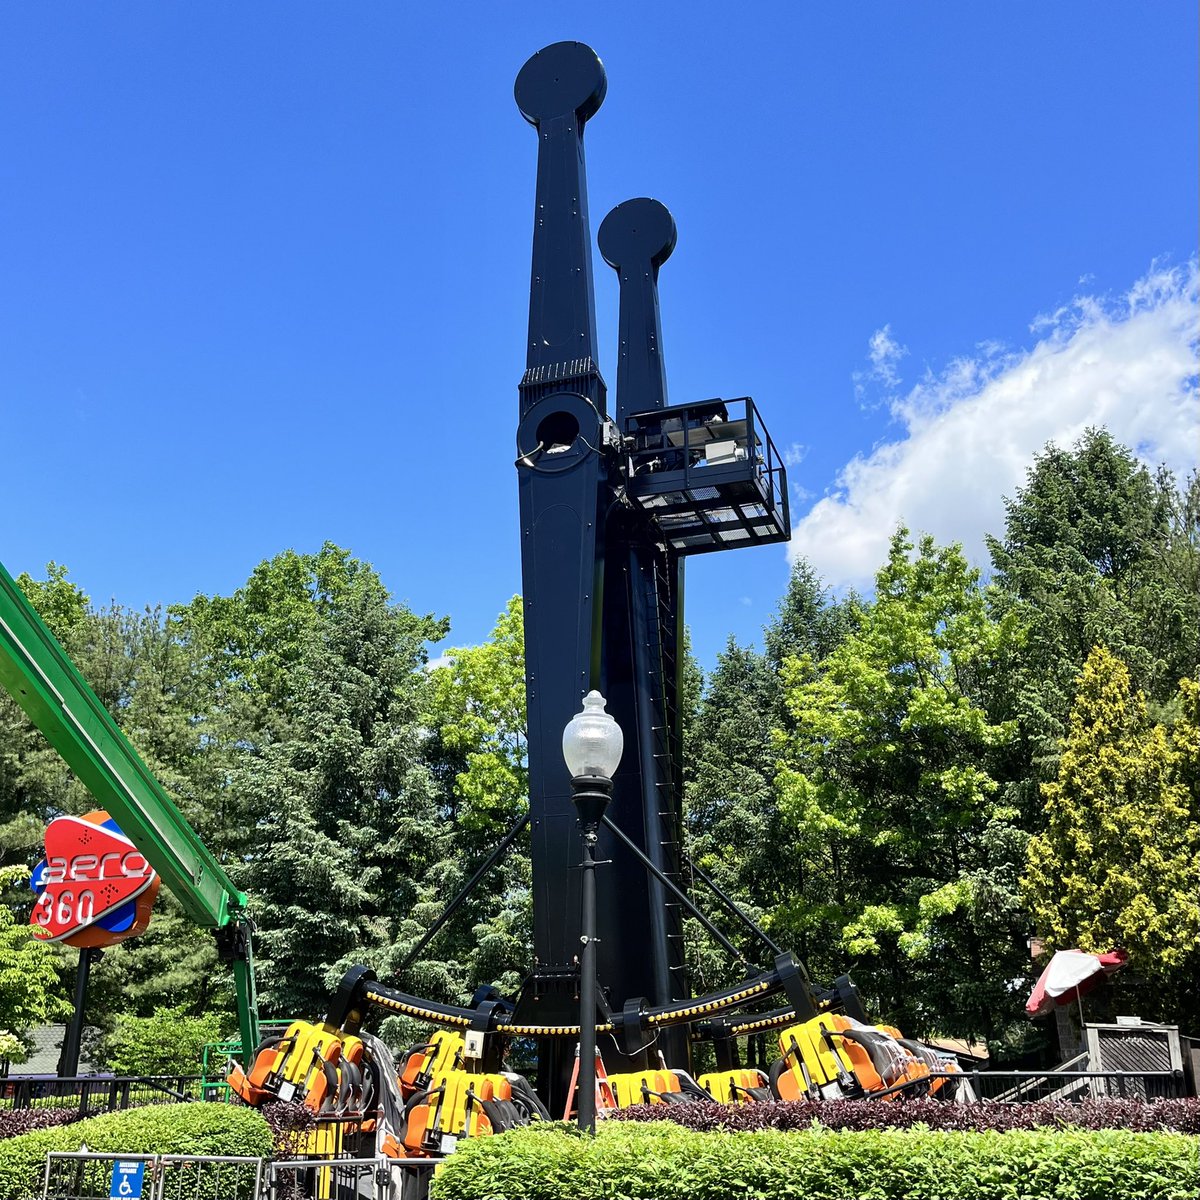 Arrowless 360 Update! ⬆️⬇️🎨 This week’s weather has been perfect for painting – and the Aero is rocking that fresh coat! Yinz get one more weekend of the Arrowless 360; the arrows are expected back next week. Ride the 360 this weekend! Tix only $39.99: tinyurl.com/mssz7ch8